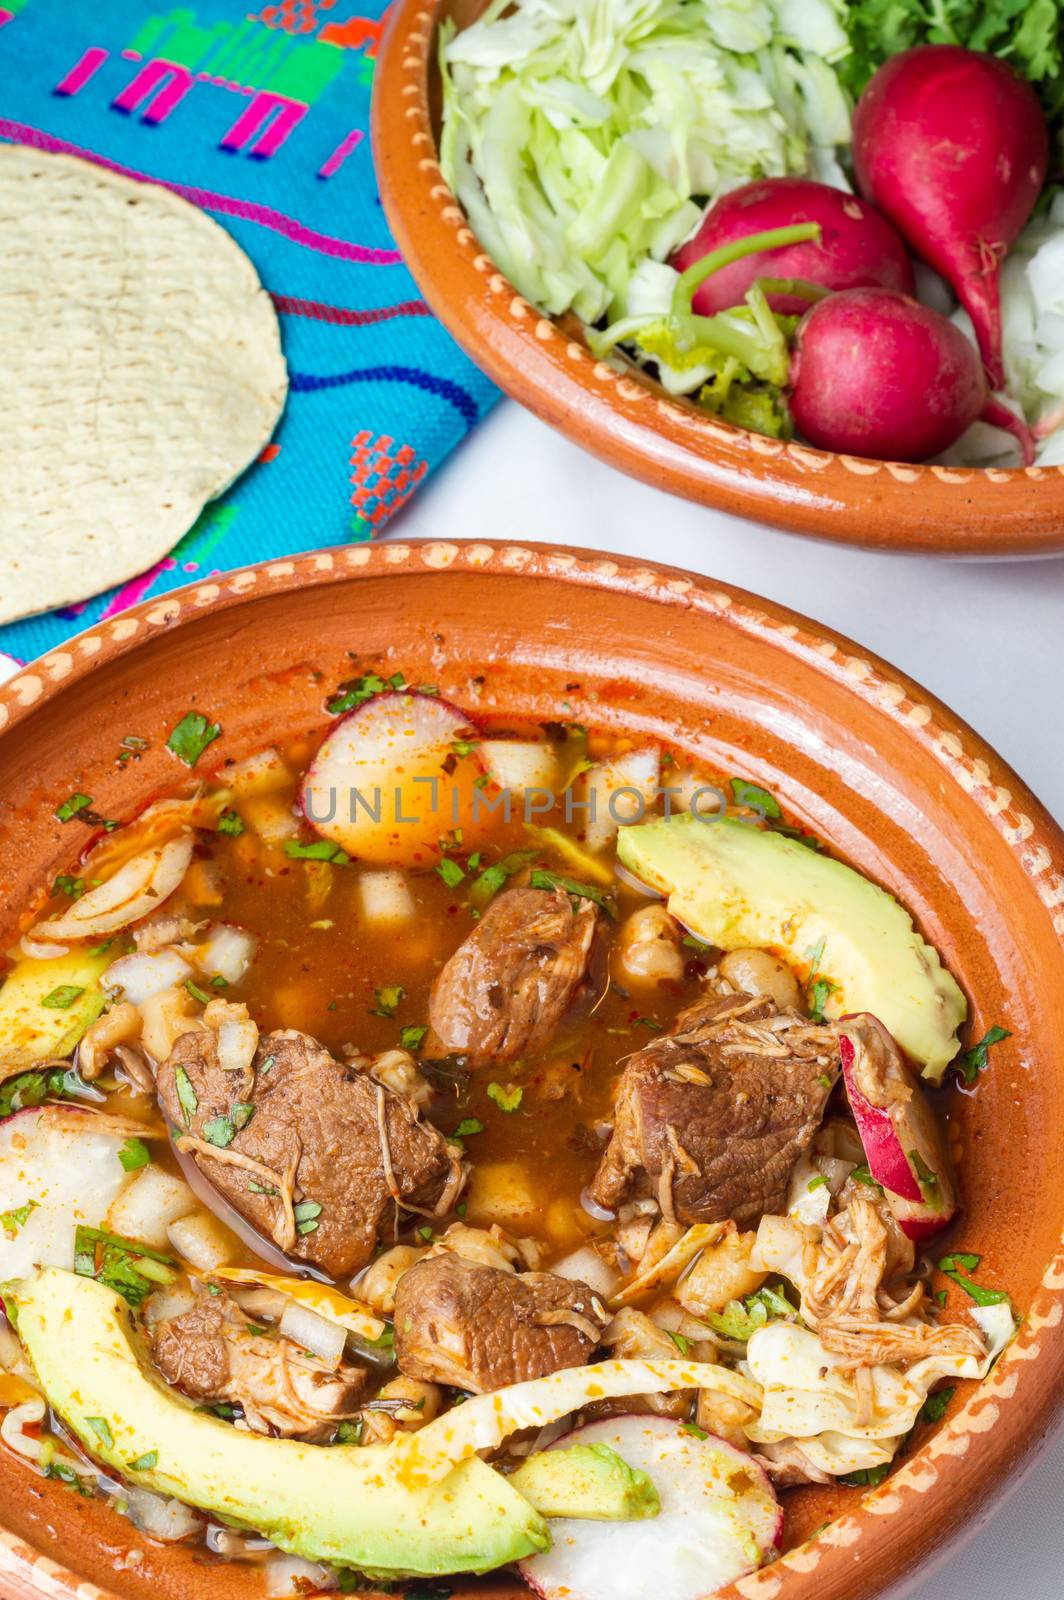 Mexican red pozole, traditional stew of the Aztecs by RobertPB